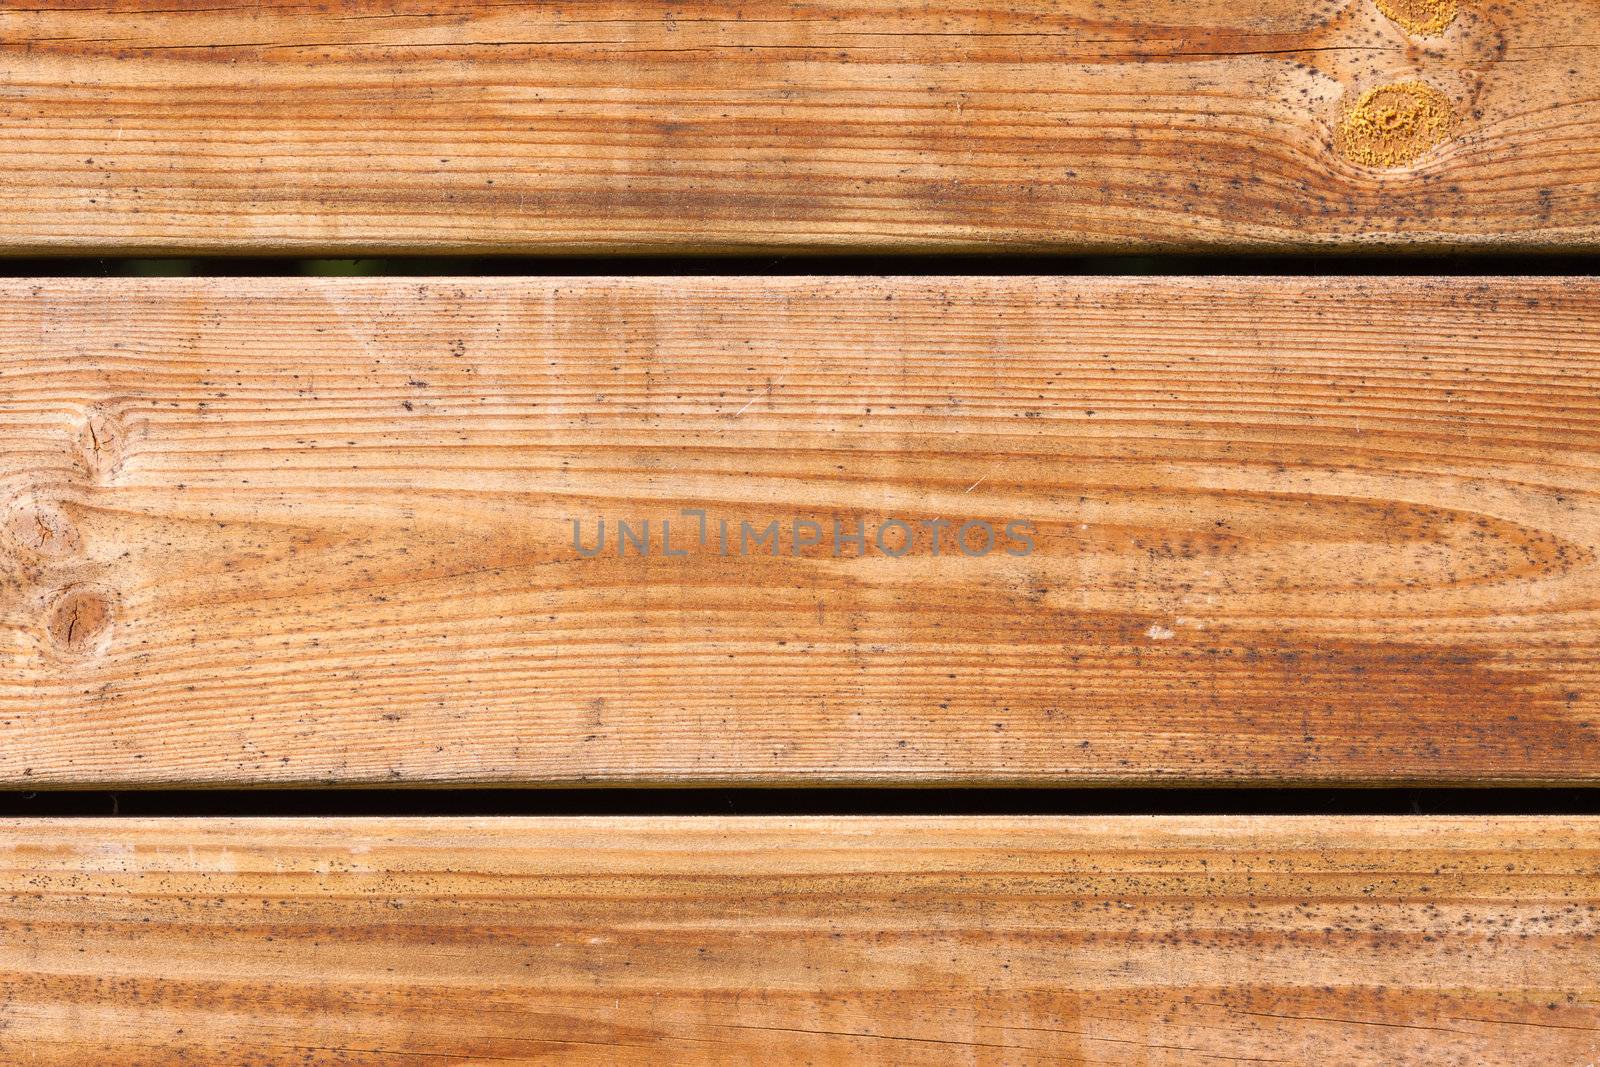 Grungy wooden floor or wall board background or texture